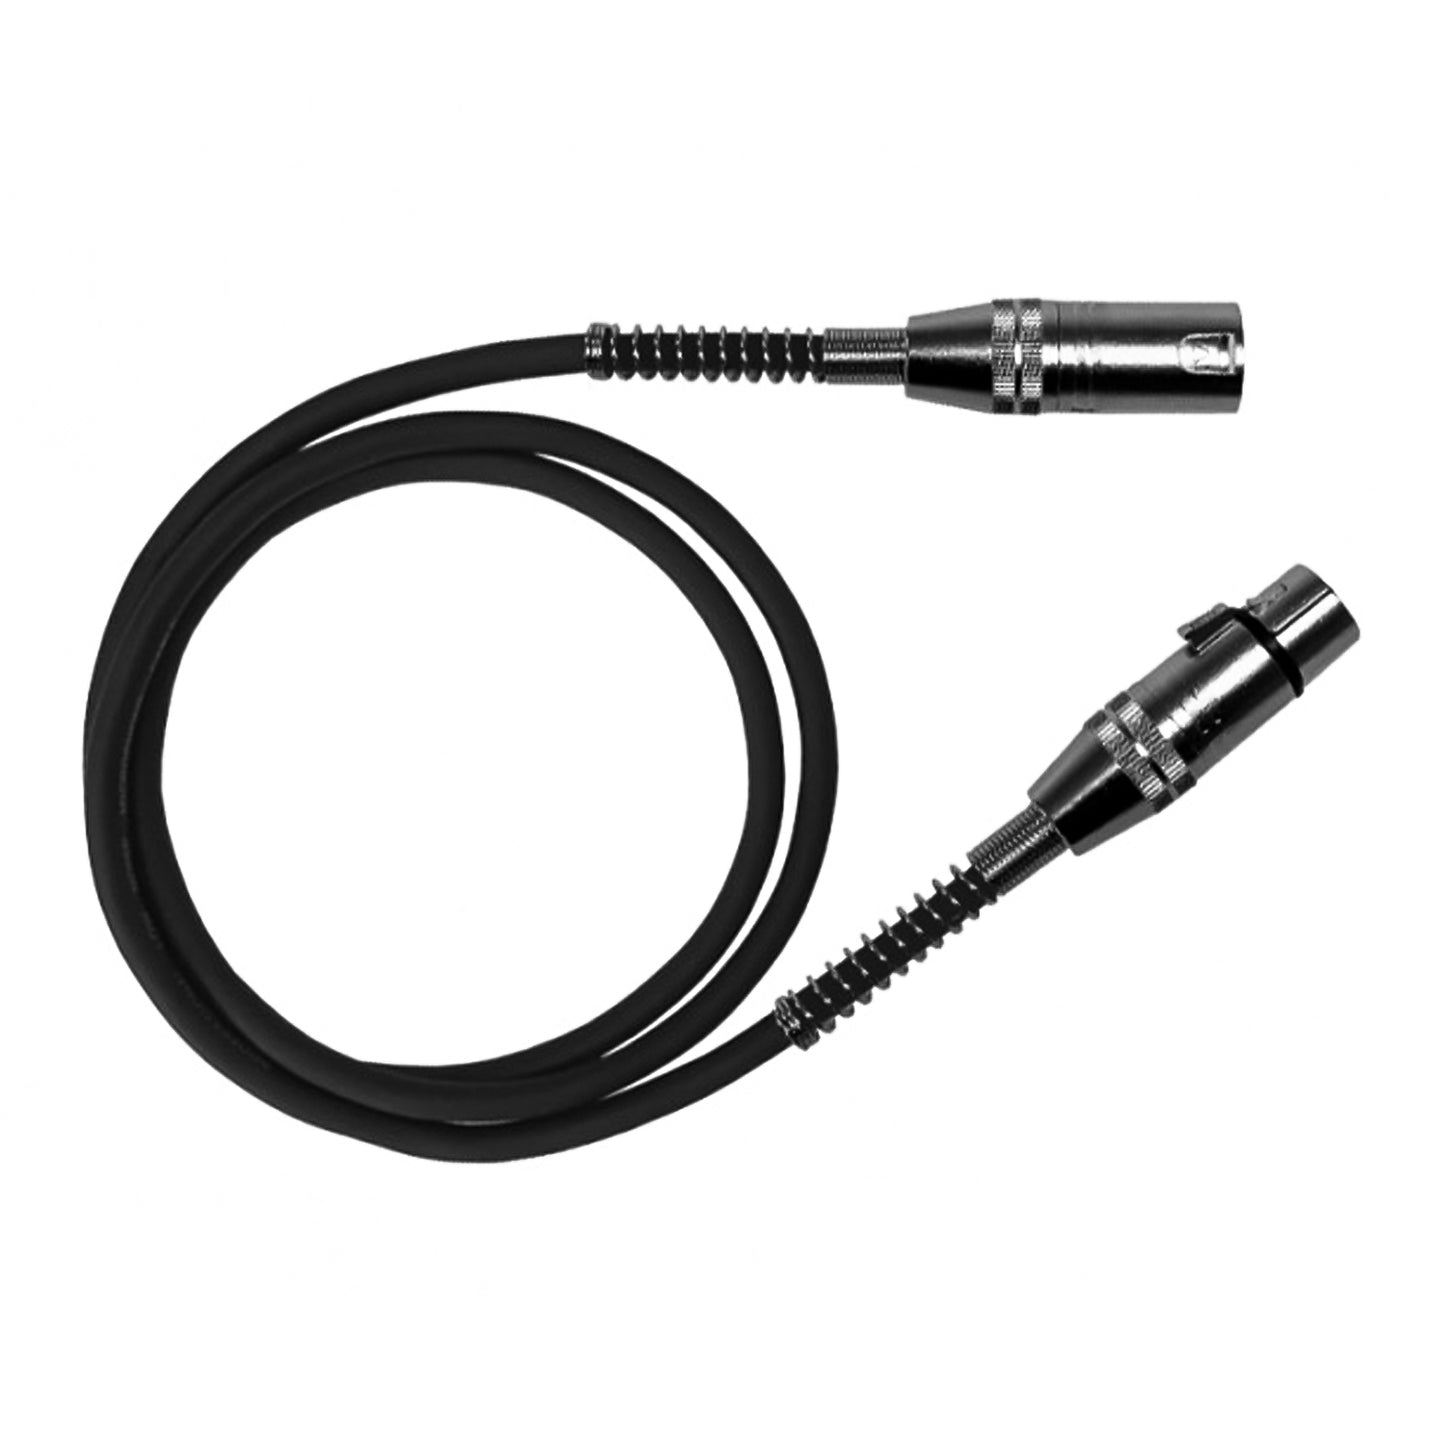 ZZIPP 3 Meter XLRM-XLRF Microphone Cable, Microphone Connector with Anti-Twist Protection, Long Audio Cable